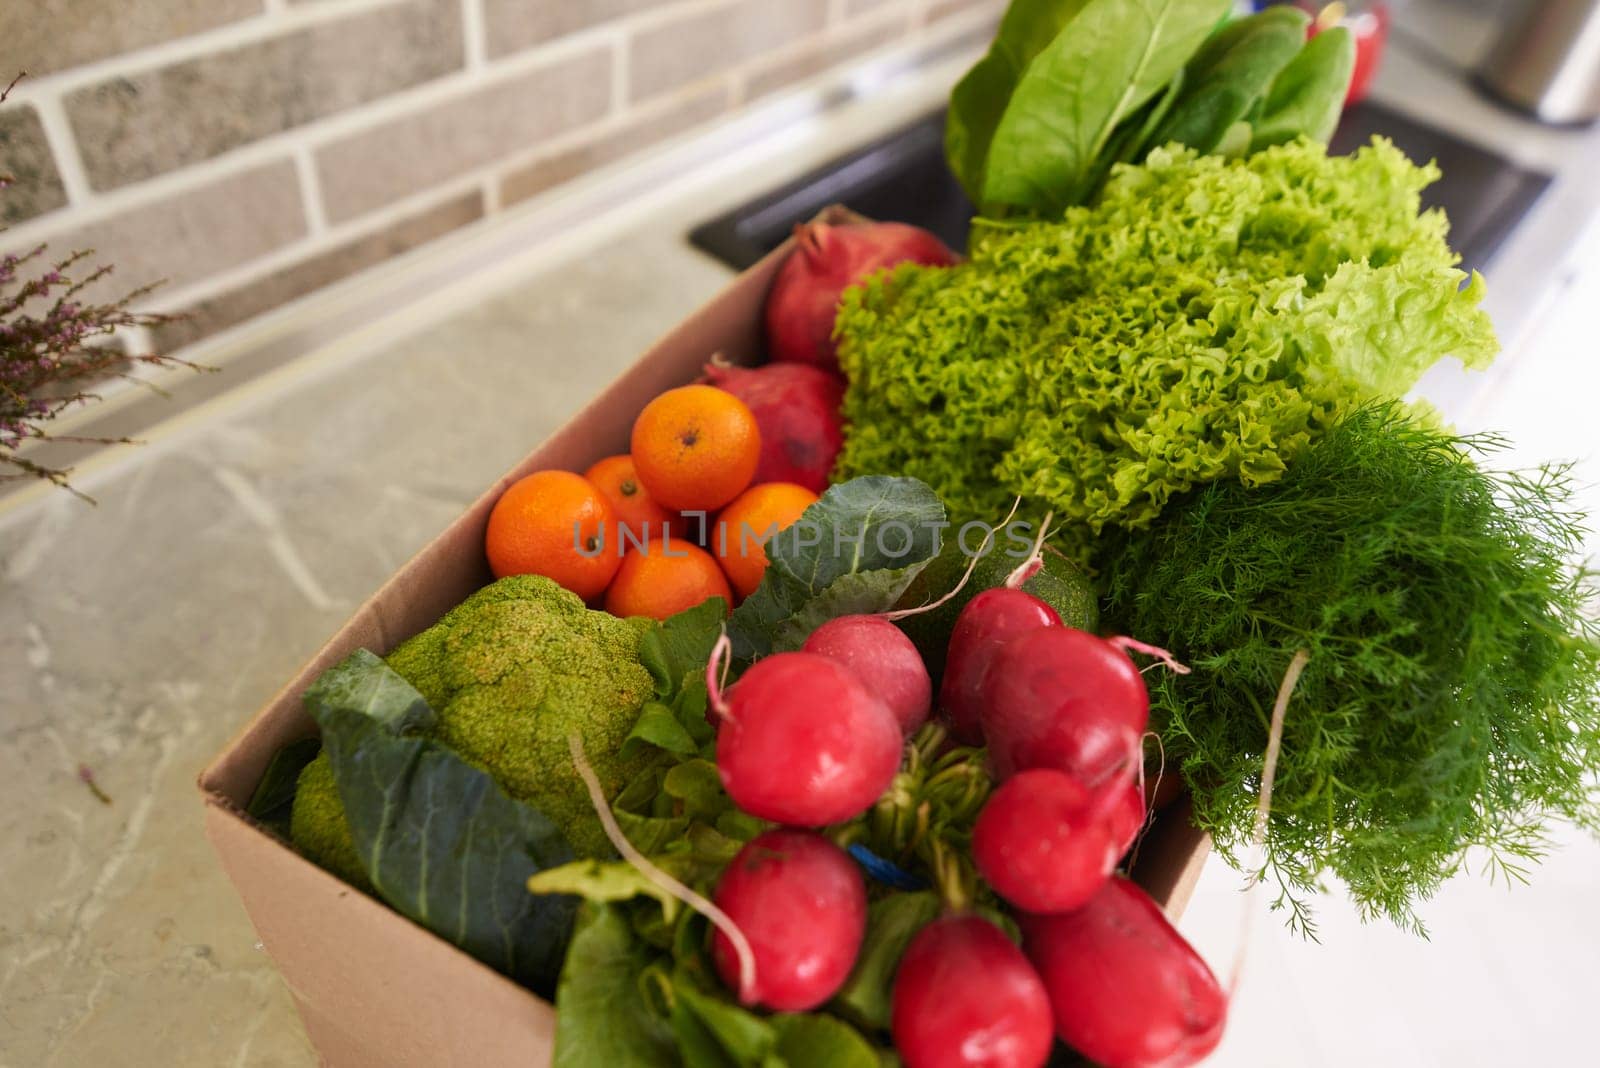 Top view of a recyclable cardboard box with fresh organic crop of fruits, vegetables and greens on the kitchen counter. Sustainable lifestyle. Healthy food and lifestyle. Slimming and diet concept